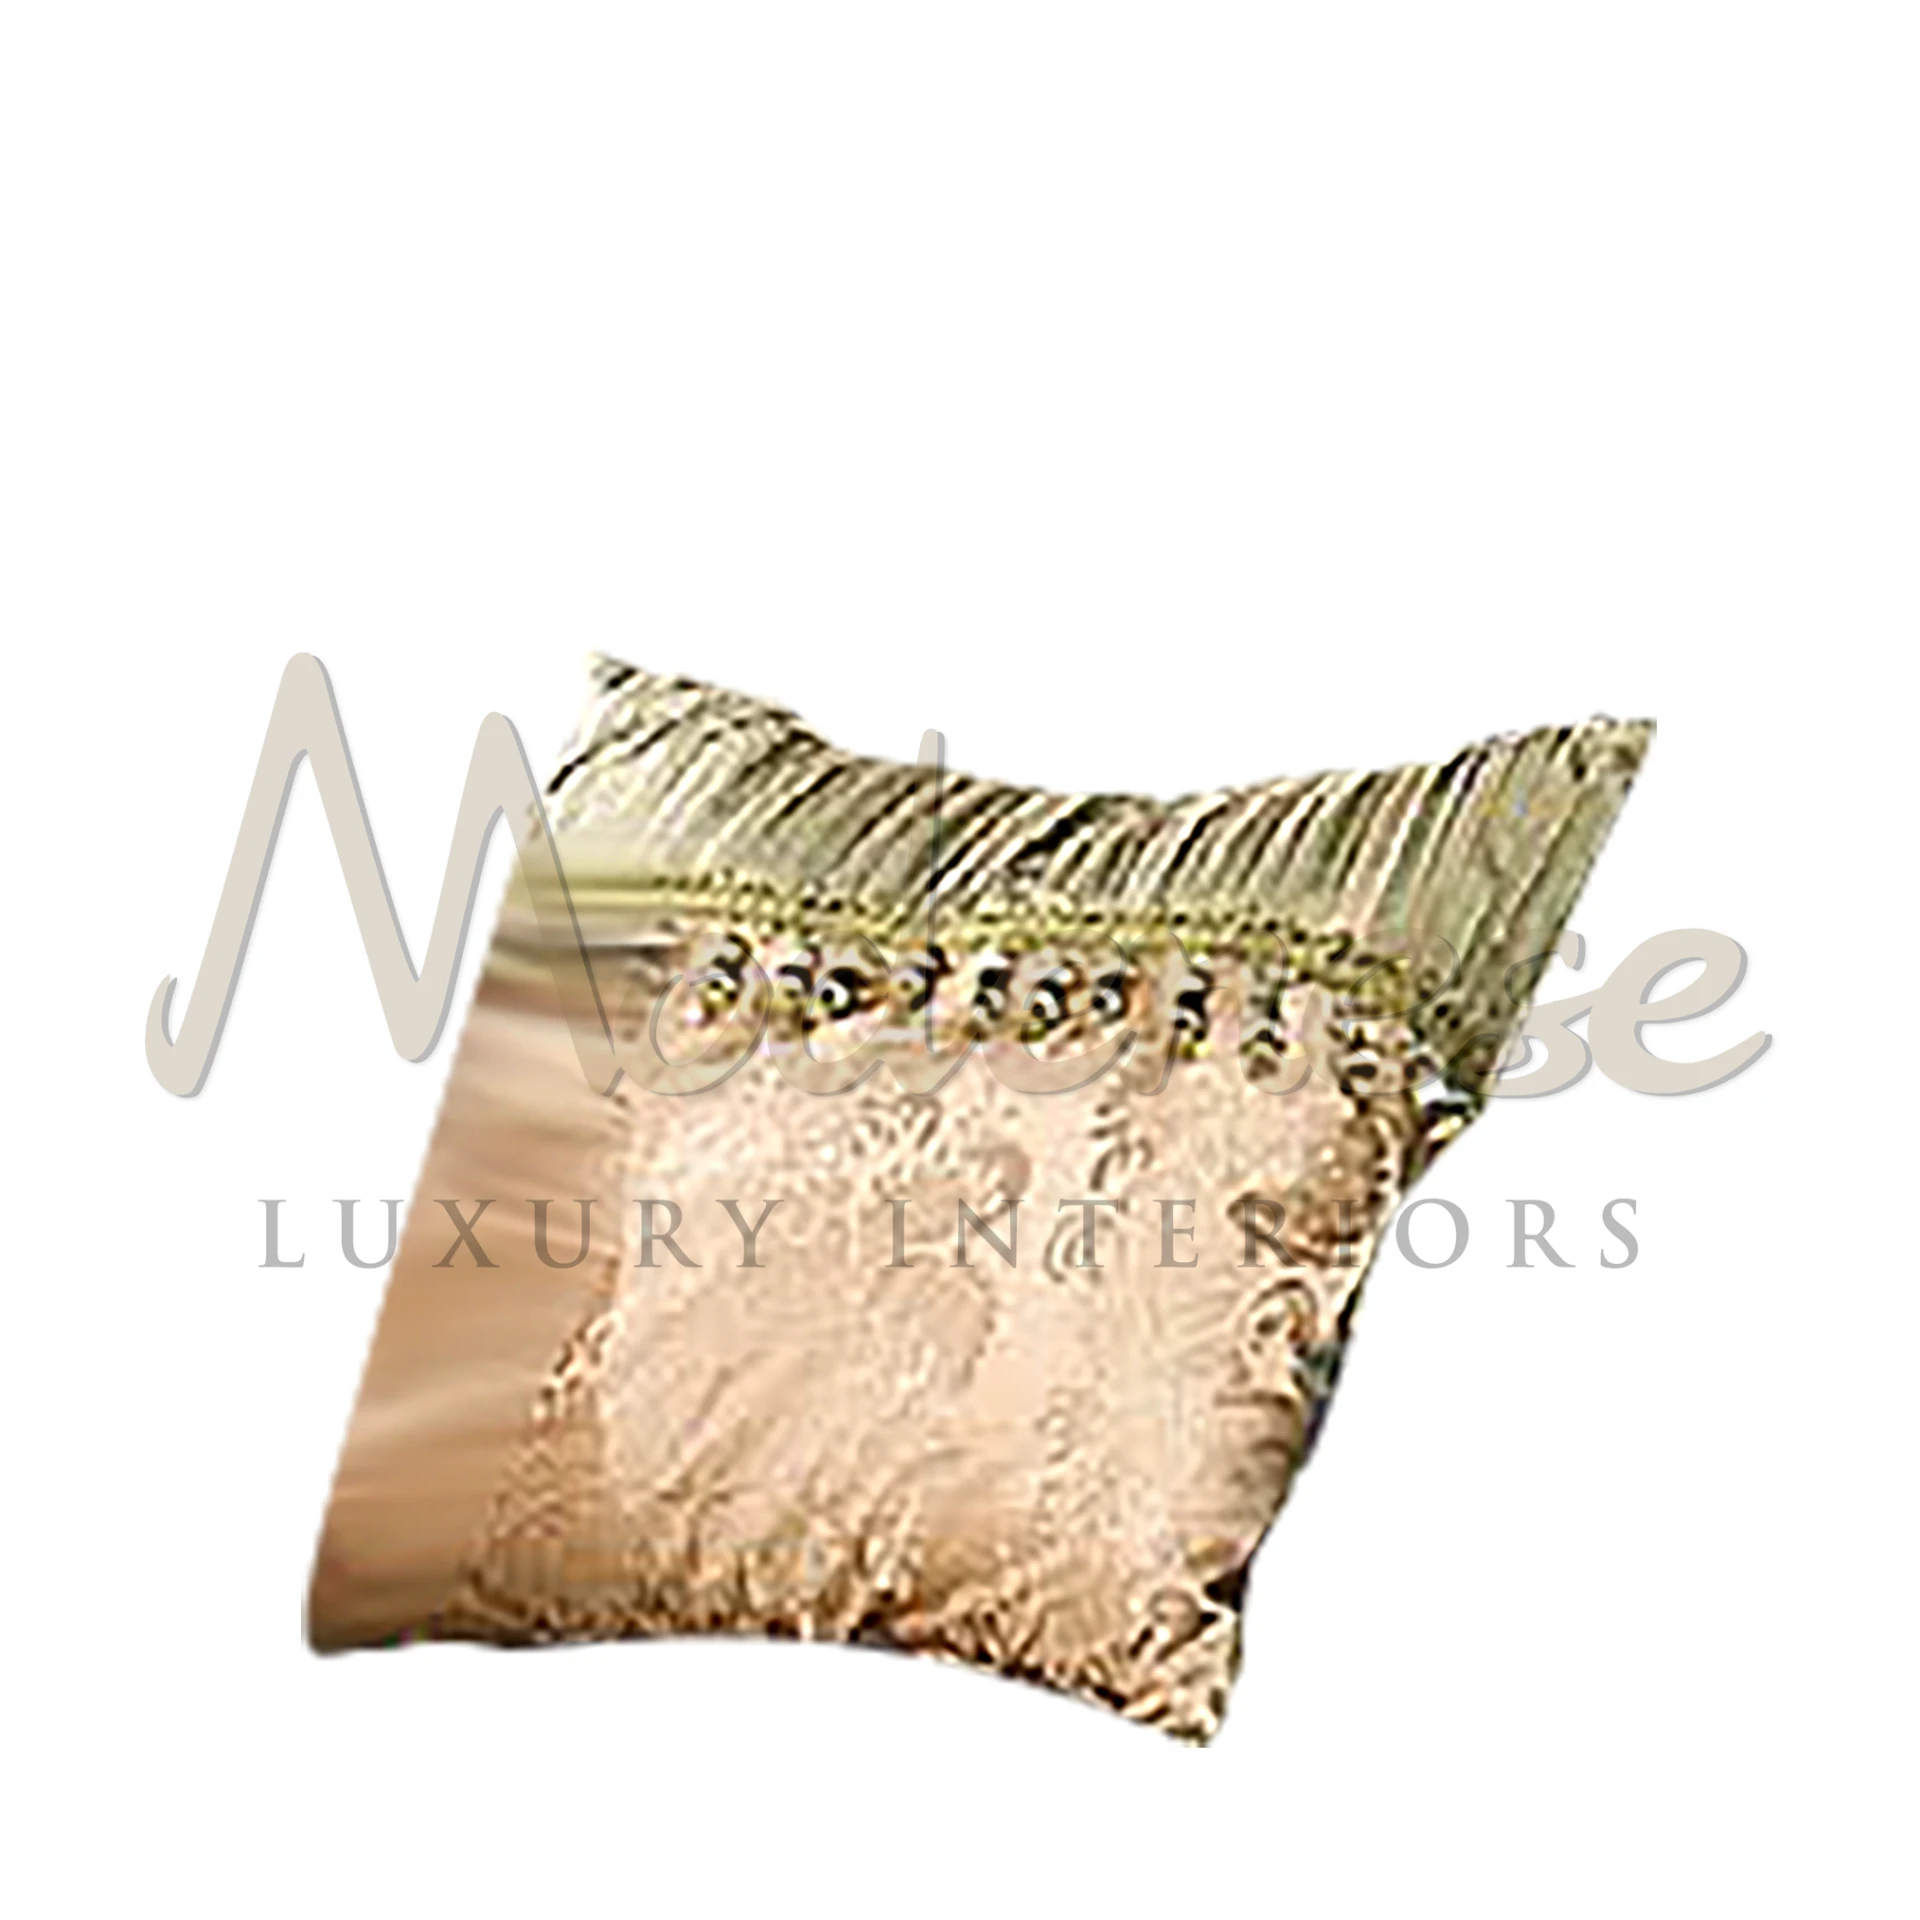 Traditional Pillow: Exquisite green elegance, detailed with delicate embroidery, showcasing artistry and high-quality craftsmanship.